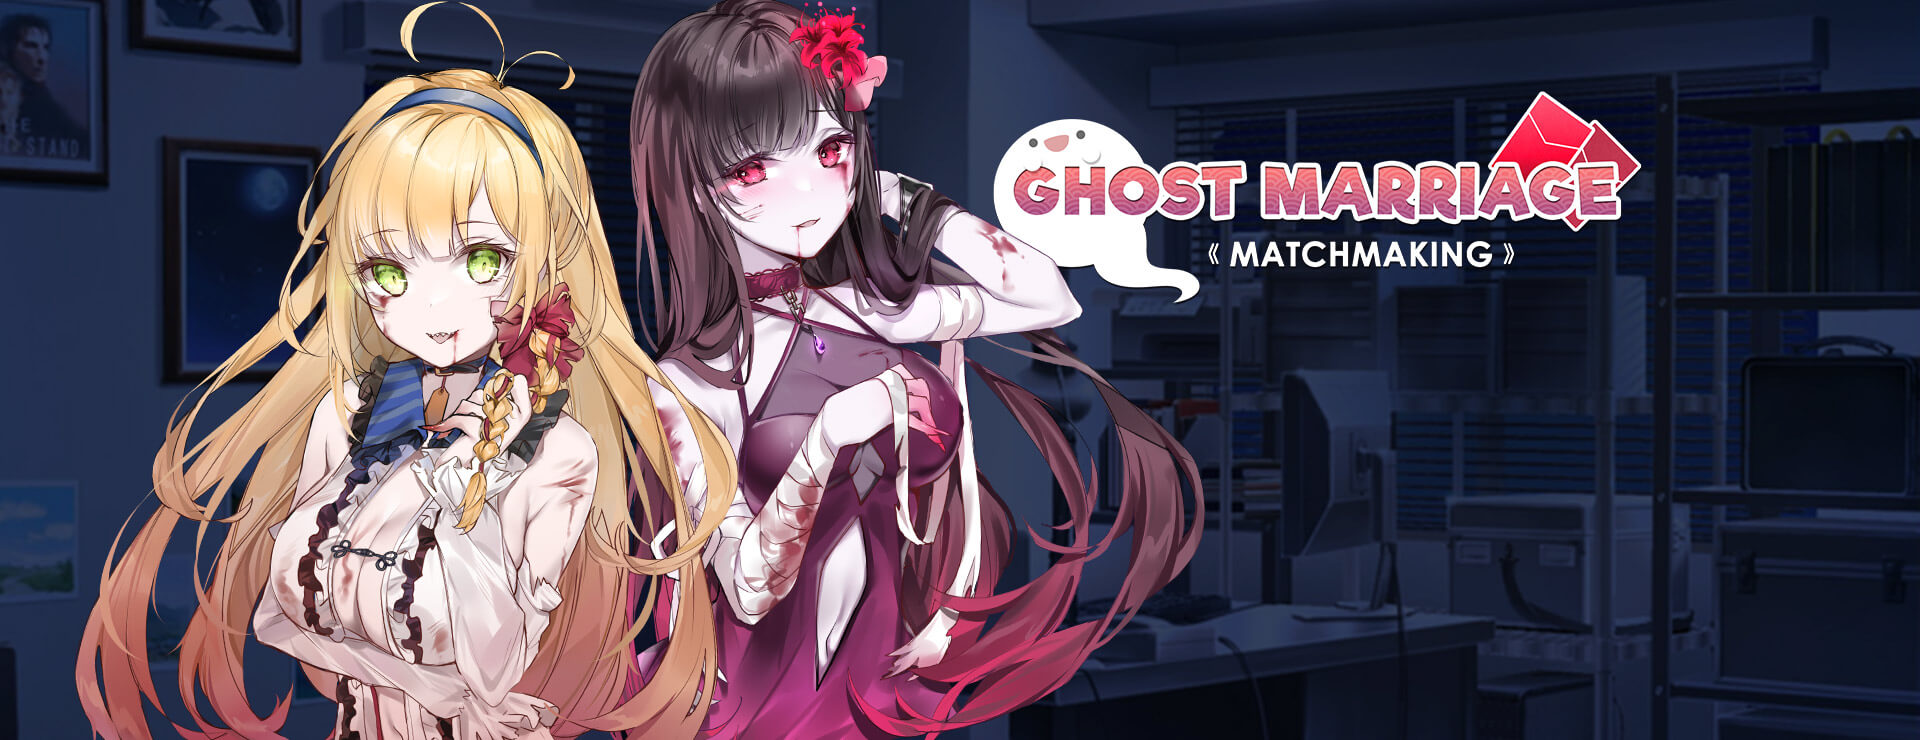 Ghost Marriage Matchmaking - RPG Juego